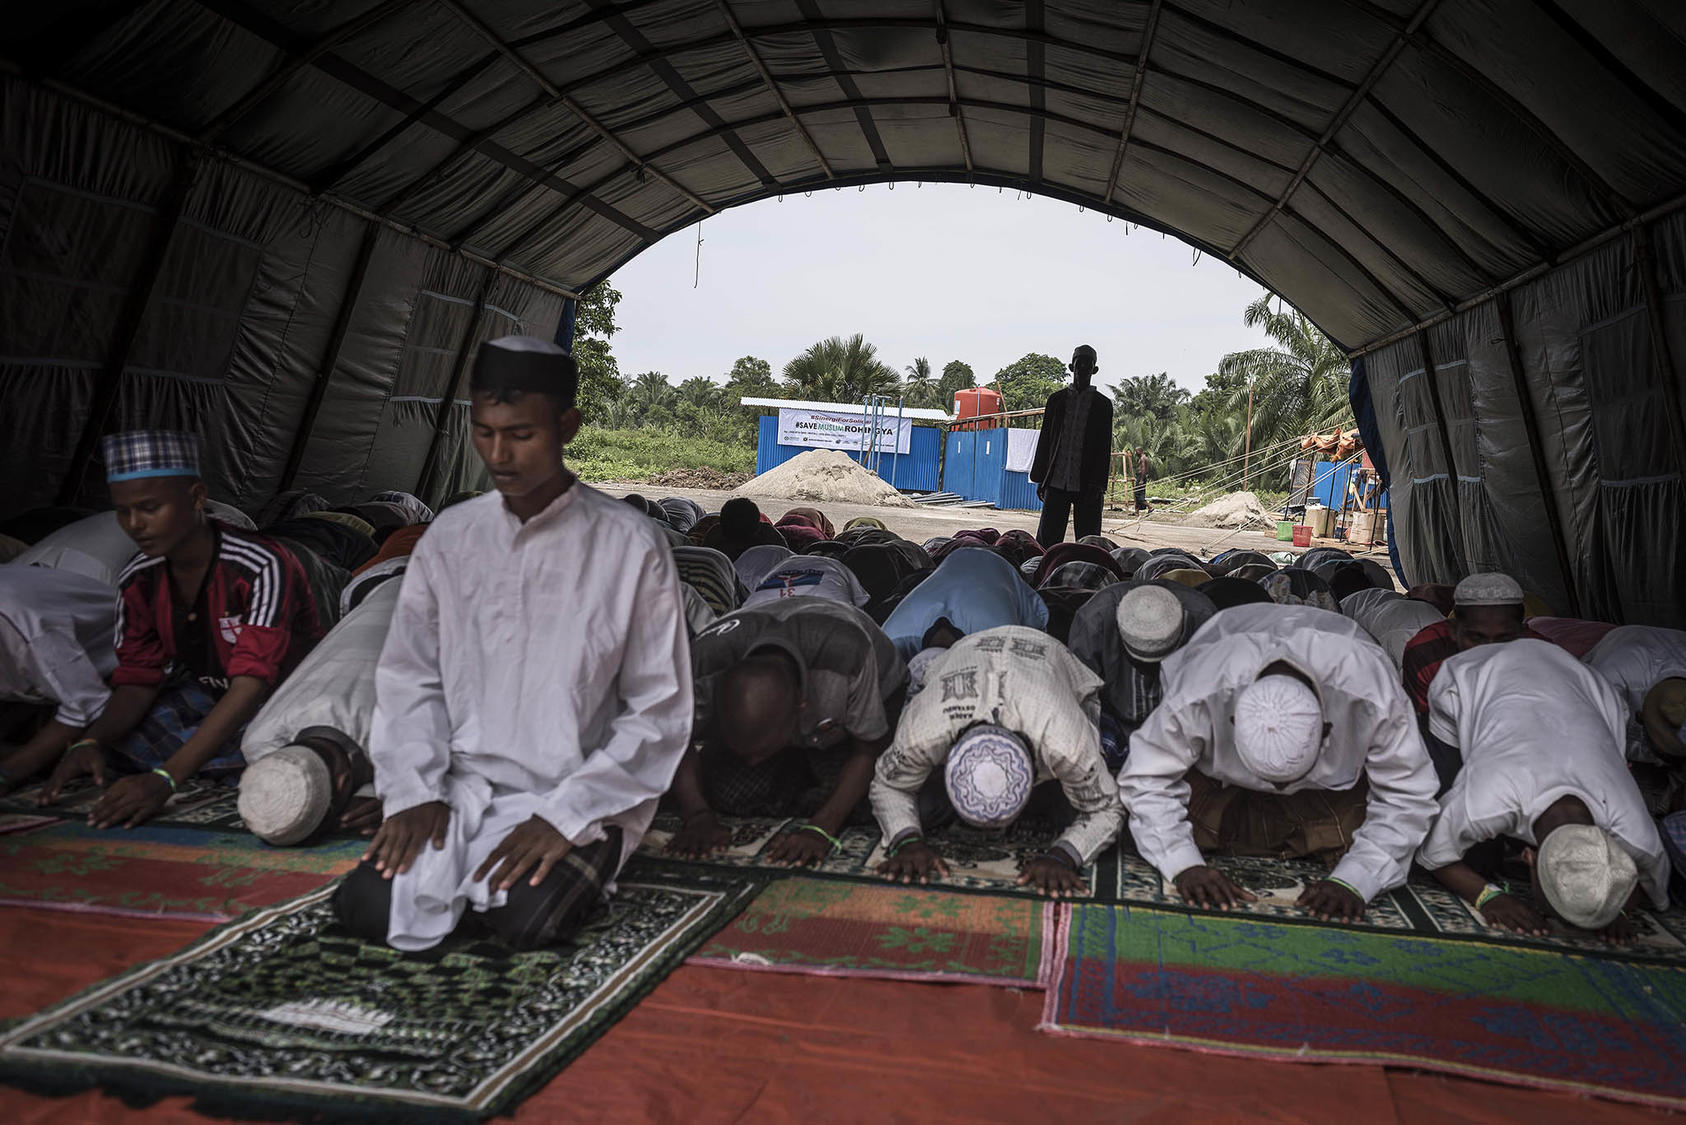 Rohingya men pray in Bayeun, Indonesia, May 25, 2015. Amid a global rise in repression religious minorities like the Rohingya, continued U.S. leadership is vital to advancing international religious freedom. (Sergey Ponomarev/The New York Times)